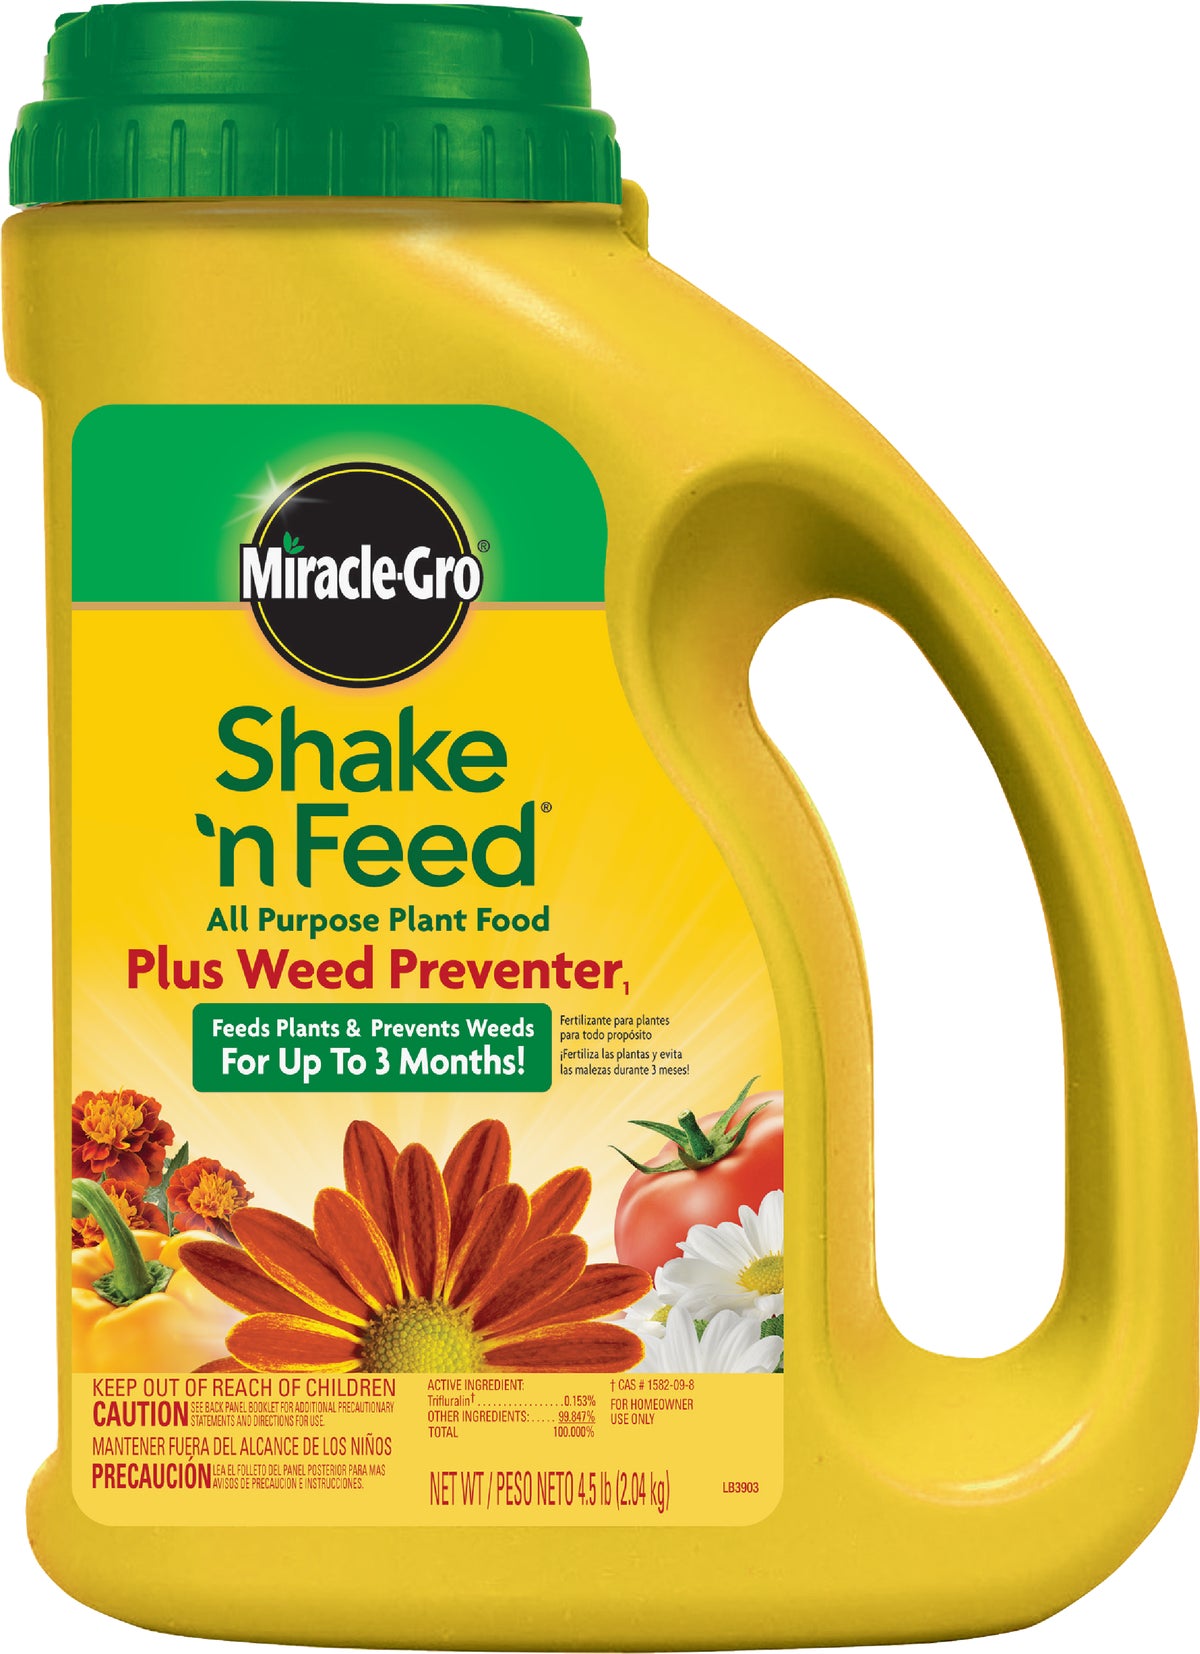 Image of Miracle-Gro Lawn Food with Weed Preventer fertilizer